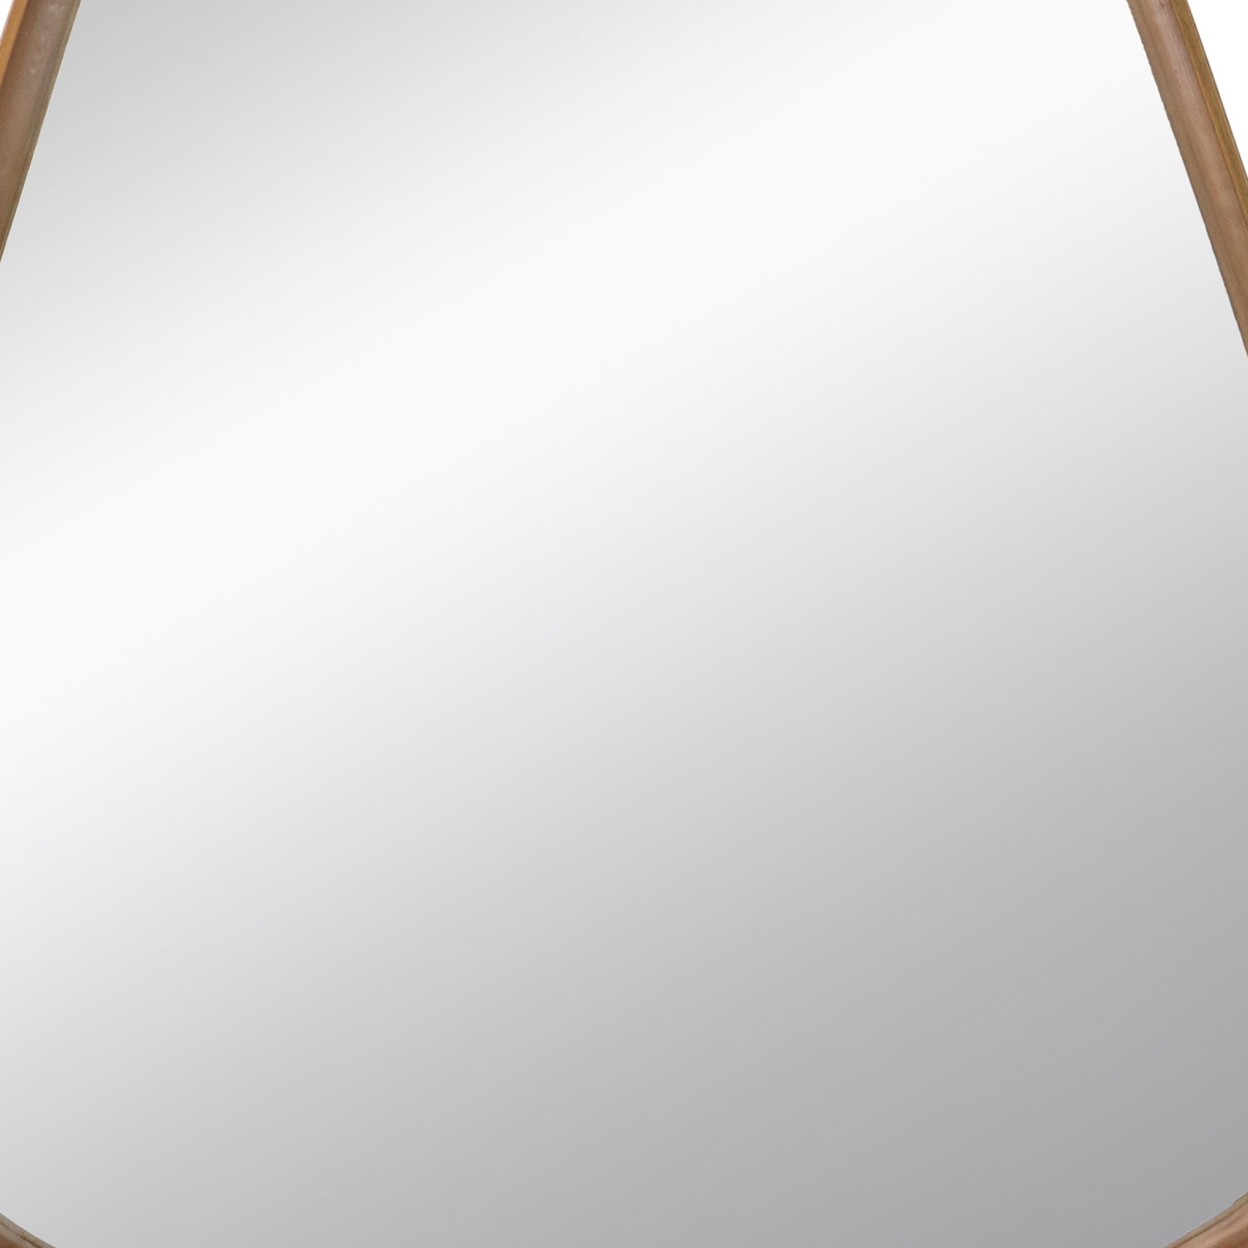 Roe 37 Inch Accent Wall Mirror, Brown Curved Pine Wood Frame, Minimalistic- Saltoro Sherpi